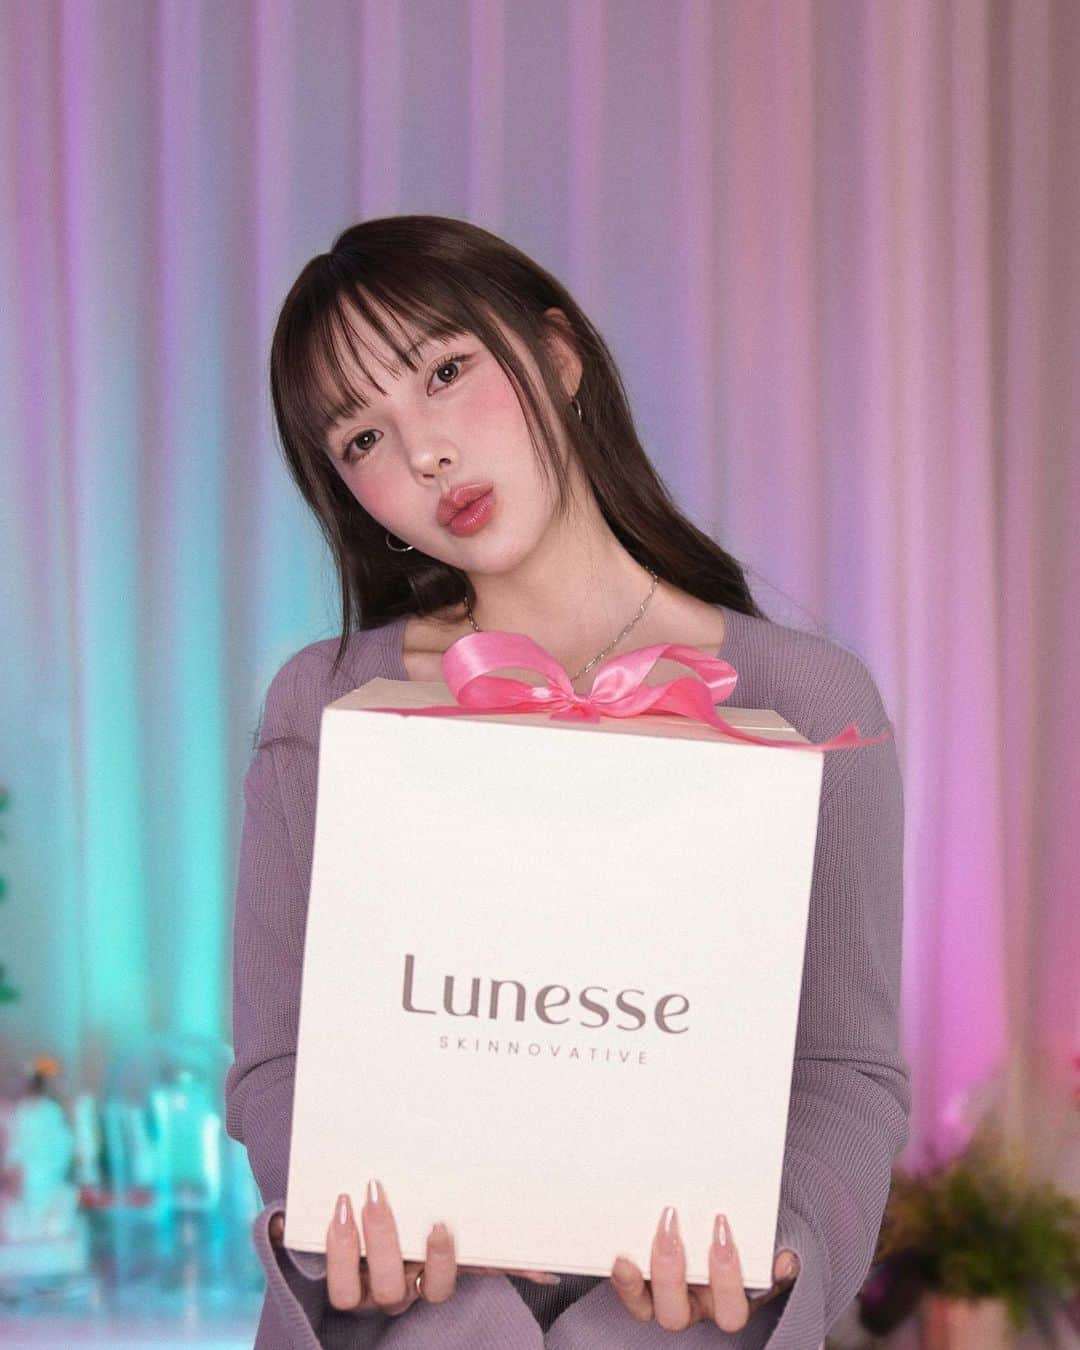 ポニーさんのインスタグラム写真 - (ポニーInstagram)「#광고  @lunesse.official sent me this beautiful PR box as a gift!🎀 I received their product range and I have been testing them since then! - I always test my products first before sharing with you all!  Due to my dry skin, this 24H Moisture Skin Balancer Cream caught my eye immediately. As the weather is changing, so is my skin condition!  I love how the product is equipped with a Hydra Lock Formula to keep my skin hydrated all day without it feeling tight or dry. I also really like how silky and smooth the texture of the product is.☁️  ✨The key ingredient for this product is 5% Niacinamide and Triple Hyaluronic Acid.   With this cream, there is no need for you to use an additional hyaluronic acid serum. I think it’s great to use it either day or night or whenever your skin feels unbalanced for special care!   @lunesse.official 루네스에서 PR 박스를 선물로 받았어요!🤍 받아 본 제품들 전부 꾸준히 테스트하고 있어요:) 환절기라 피부 상태도 예민하고 건조해서 24H 수분 스킨 밸런서 크림을 가장 먼저 사용해 봤어요!  하이드라락 포뮬러 제품으로 피부가 당기거나 건조하지 않게 도움 주고 무거운 느낌 없이 하루 종일 촉촉하게 유지되는 느낌의 크림이에요☁️ 5% 나이아신아마이드와 트리플 히알루론산이 핵심 성분으로 들어가 있는데, 텍스처가 엄청 부드럽고 기름기 없이 매끄럽게 마무리돼요!  트리플 히알루론산이 들어가 있어서 히알루론산 세럼을 추가로 사용할 필요가 없고, 낮/밤 구분없이 사용하기 좋은 제품이에요!  #Lunesse #PonyforLunesse #skincareroutine #skinvestmentstartshere」4月19日 12時00分 - ponysmakeup